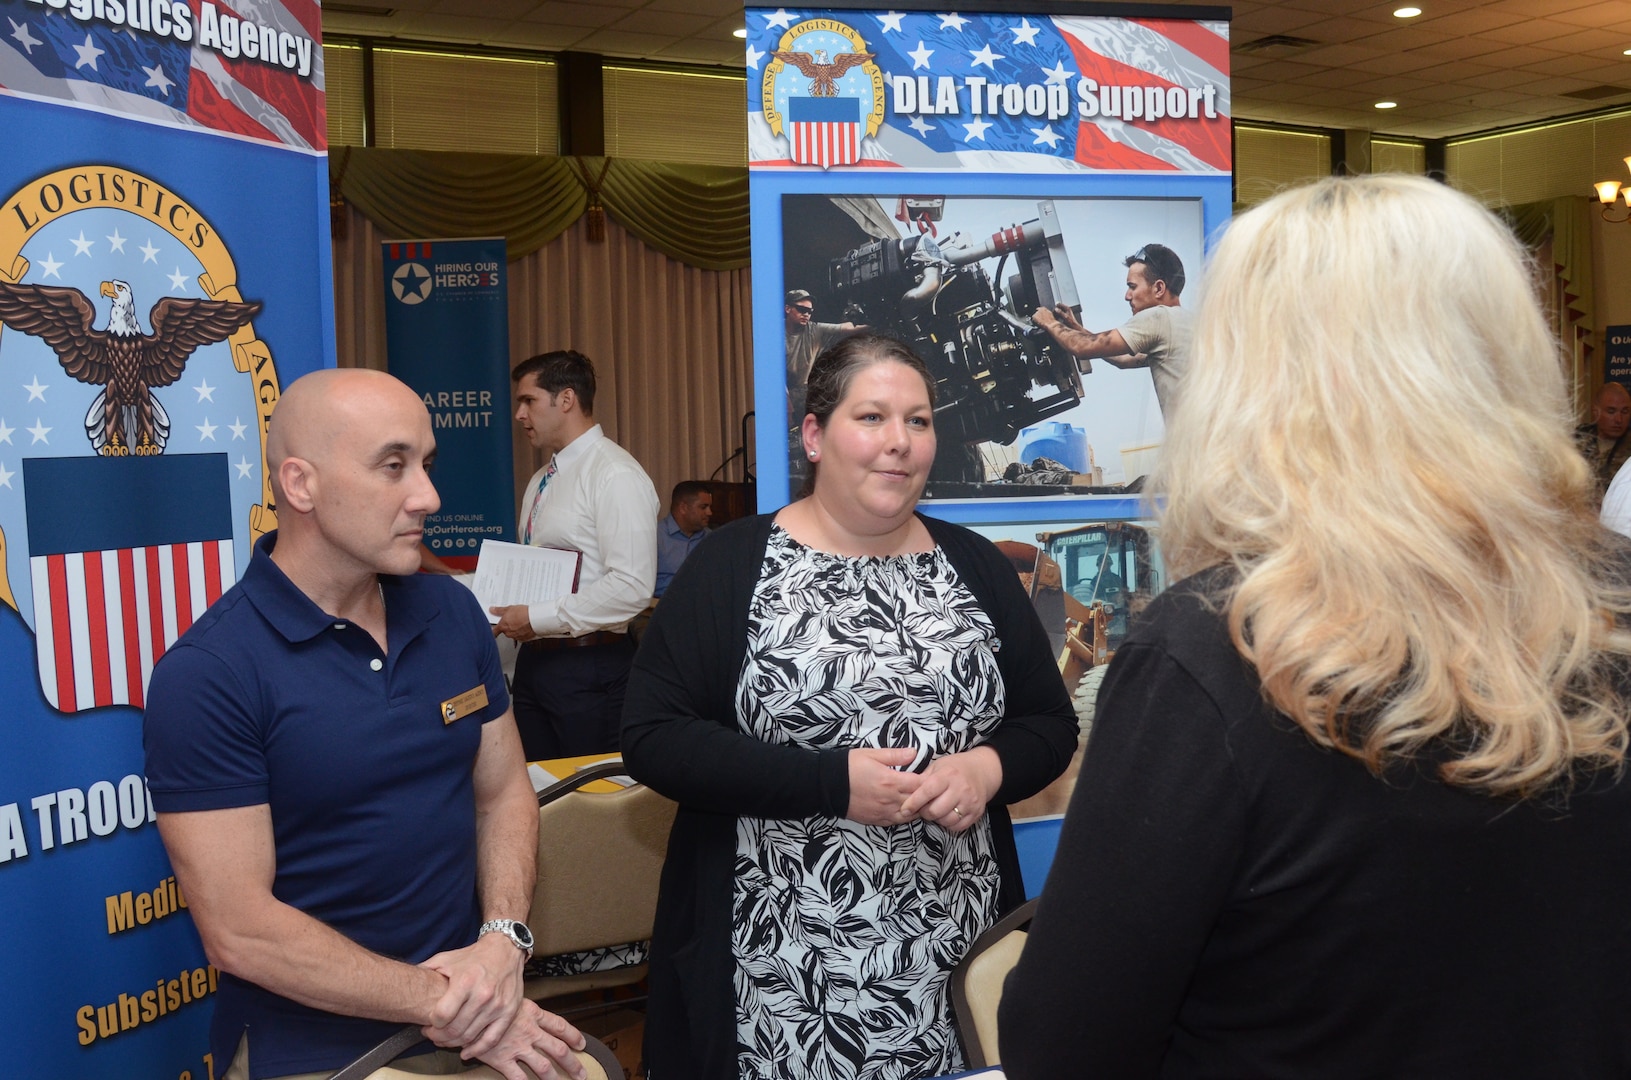 Jose Pereira, DLA Troop Support Industrial Hardware tech/quality division chief, left, and Annie Firth, Troop Support lead human resources specialist, right of Pereira, speak with a potential applicant at Joint Base McGuire-Dix-Lakehurst, New Jersey, May 30, 2019.